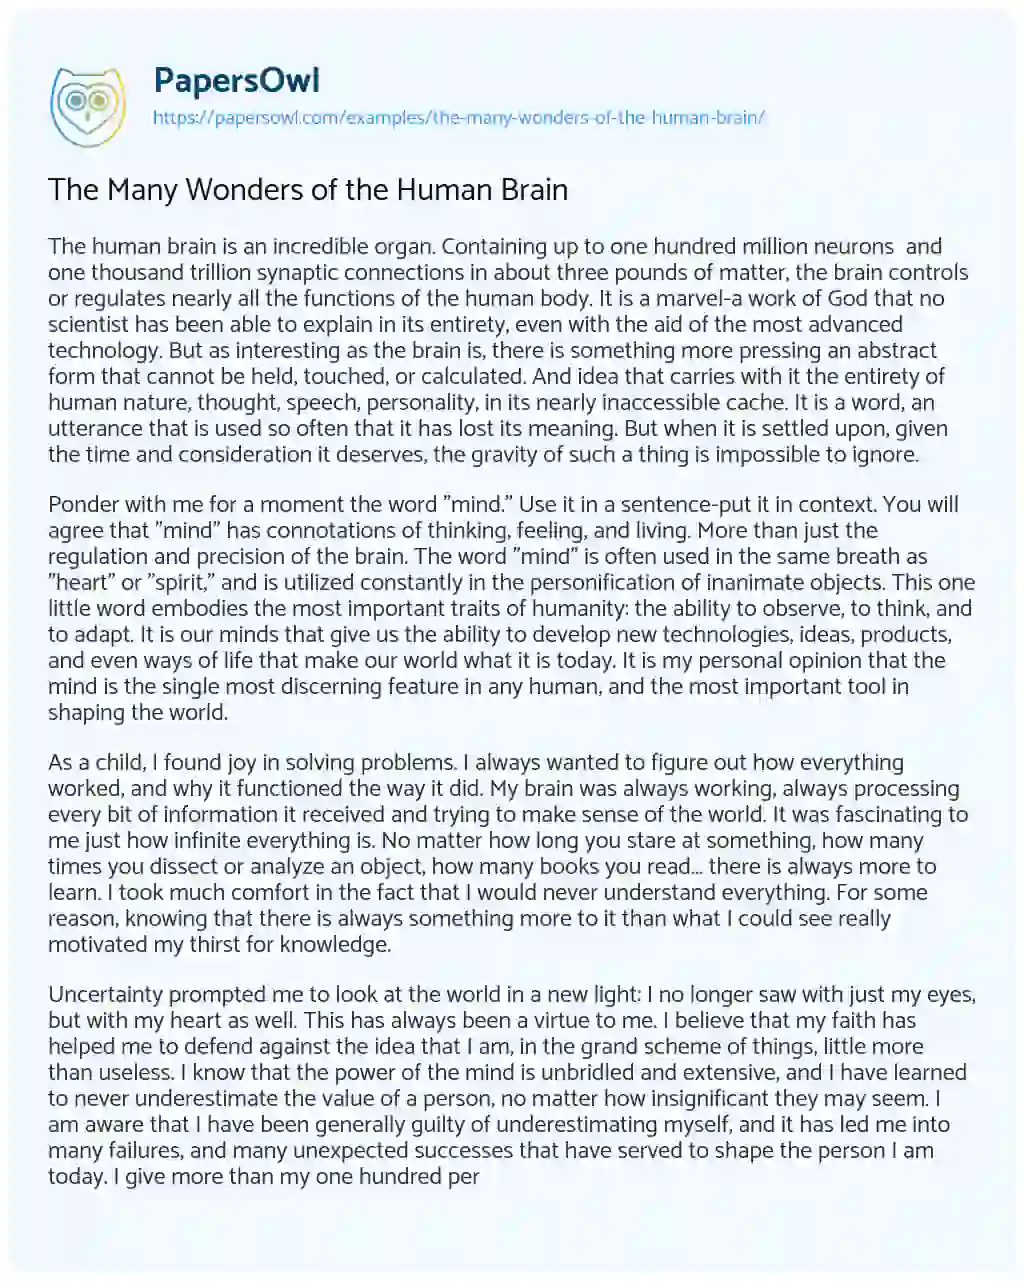 Essay on The Many Wonders of the Human Brain